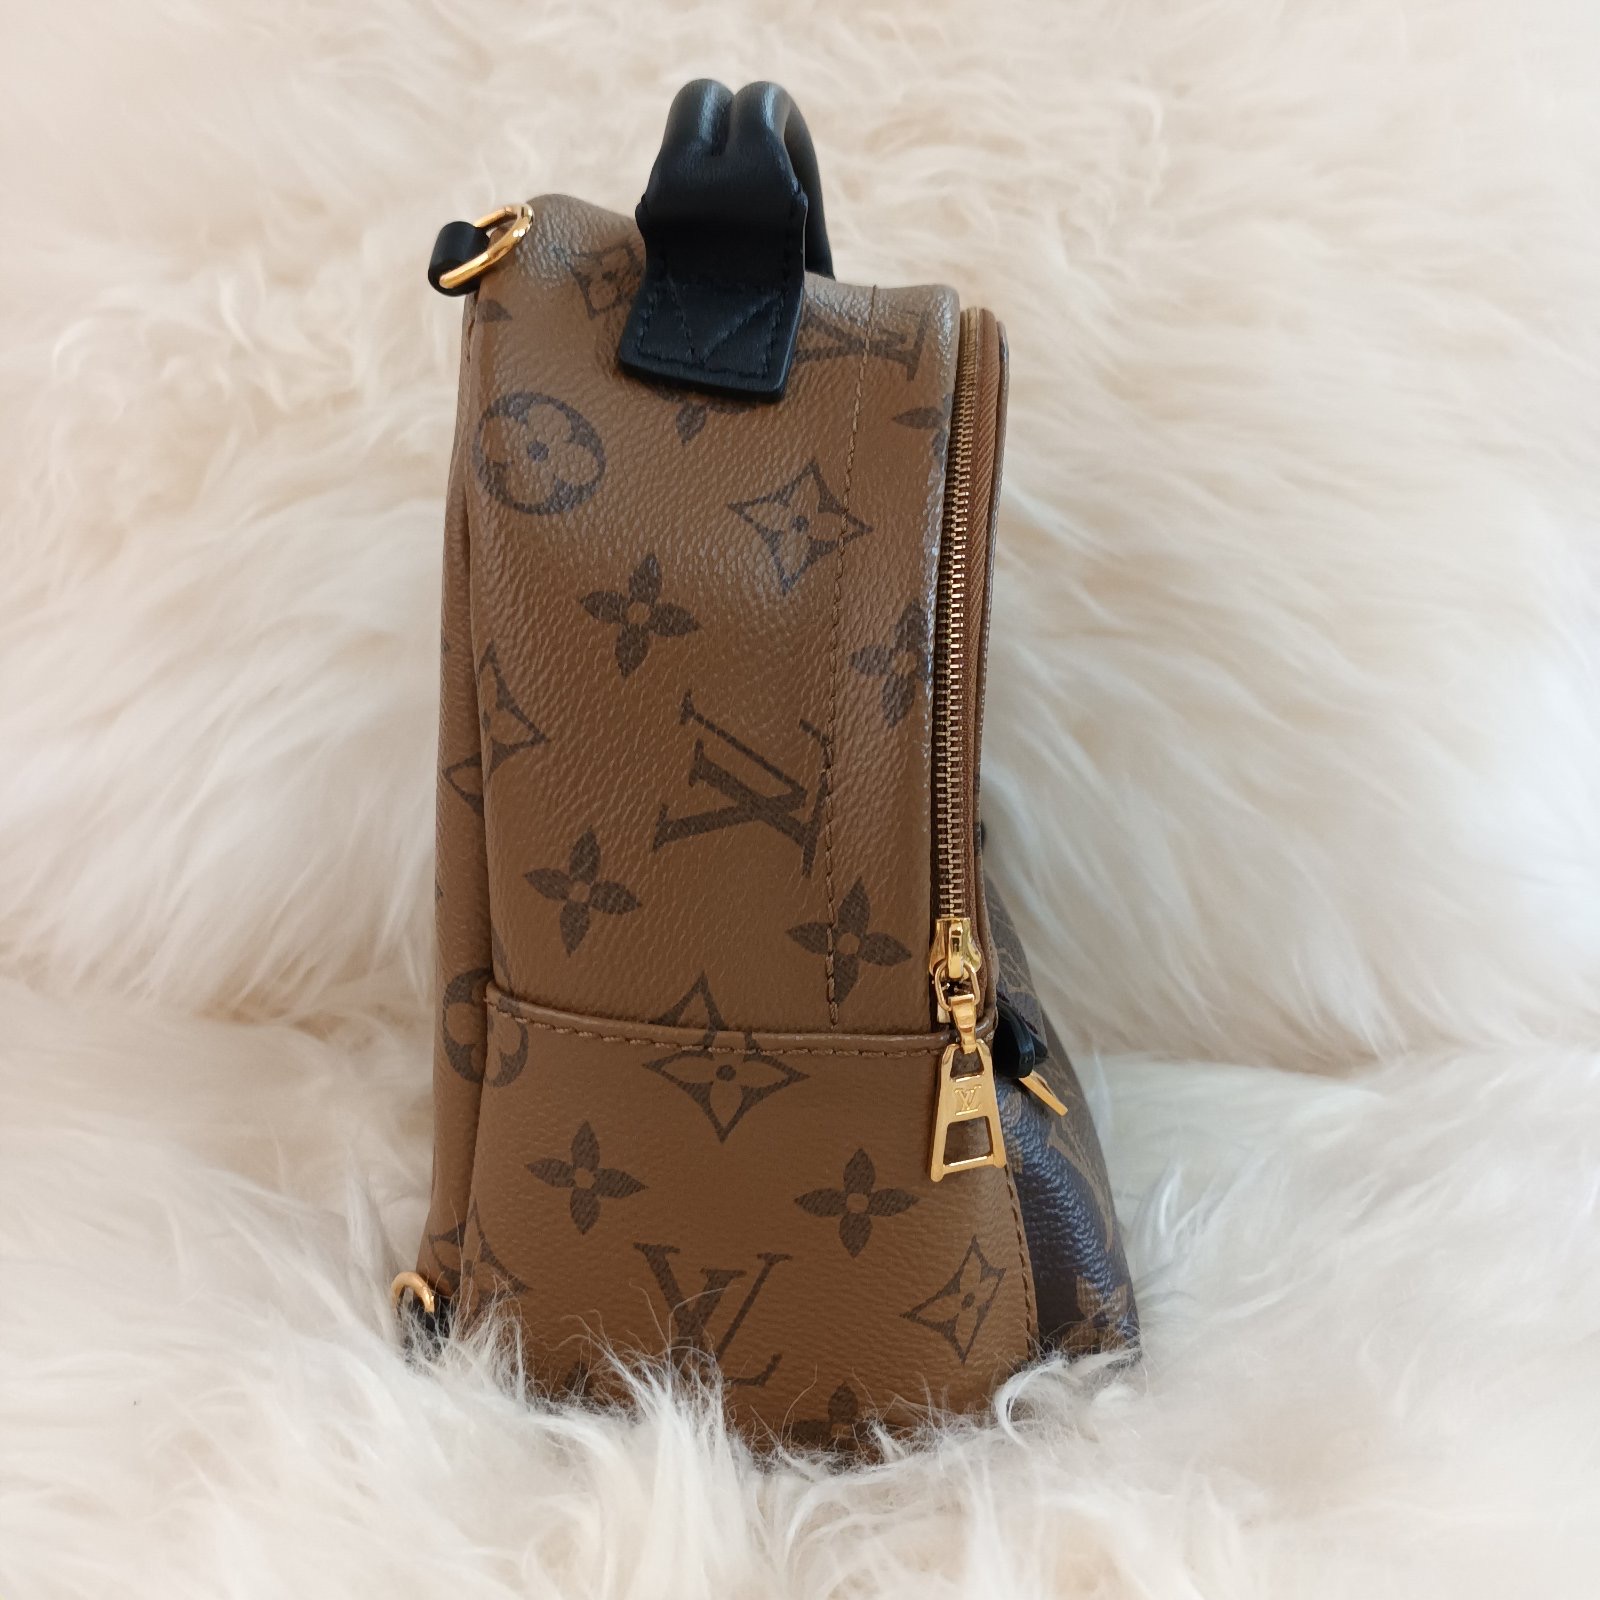 Buy Organizer for Tiny Backpack Louis Vuitton Organizers Bag